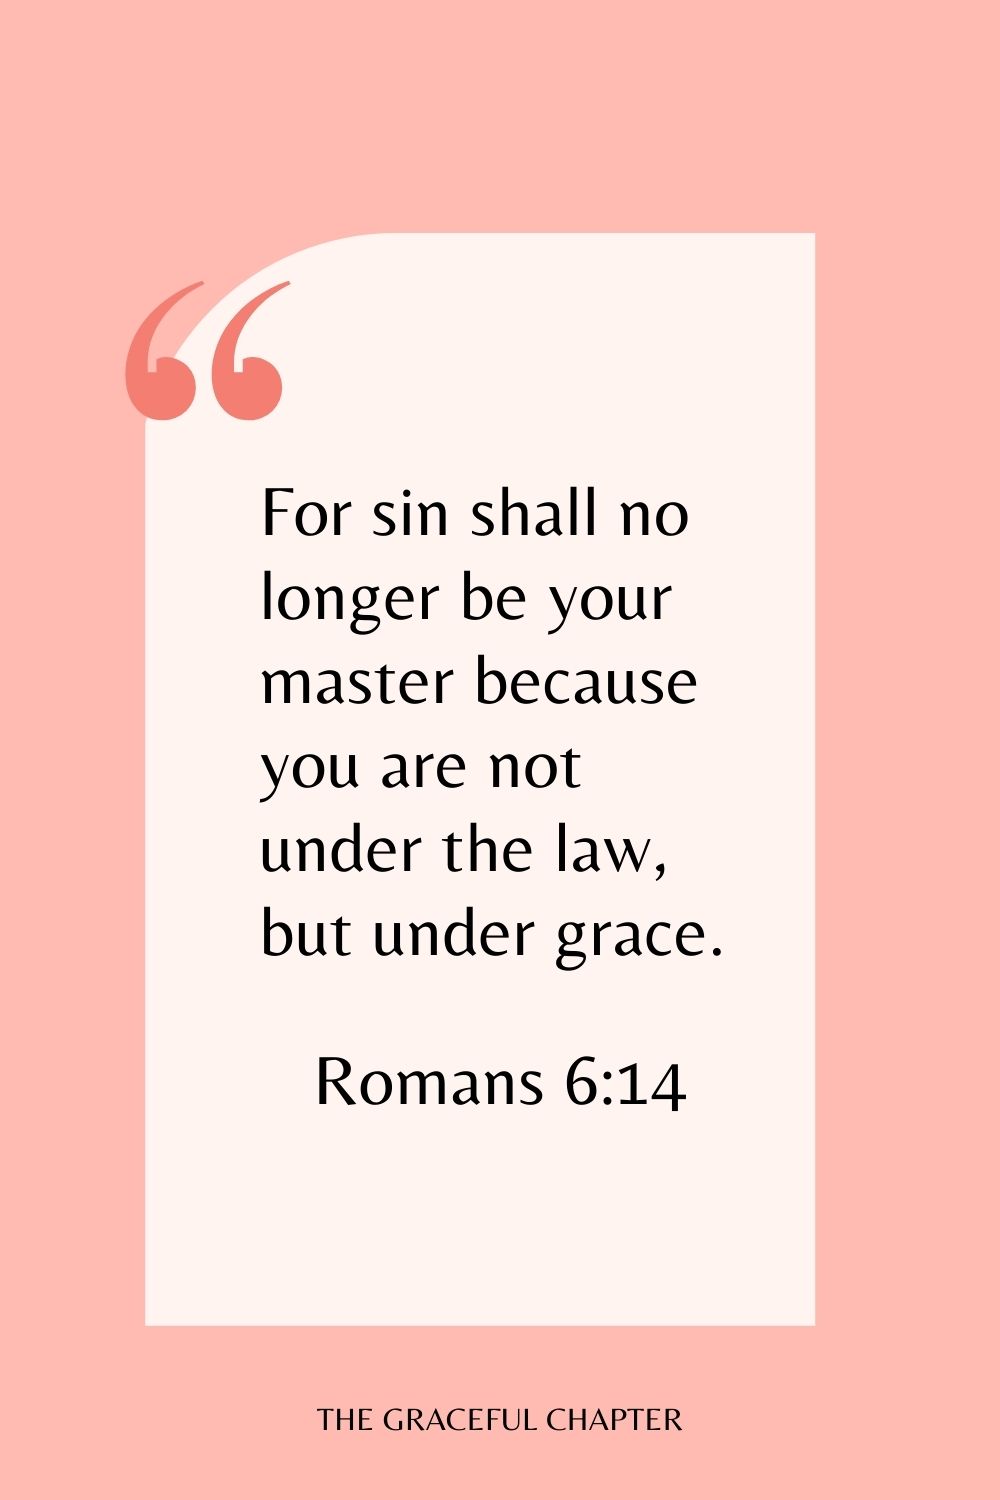 For sin shall no longer be your master because you are not under the law, but under grace. Romans 6:14